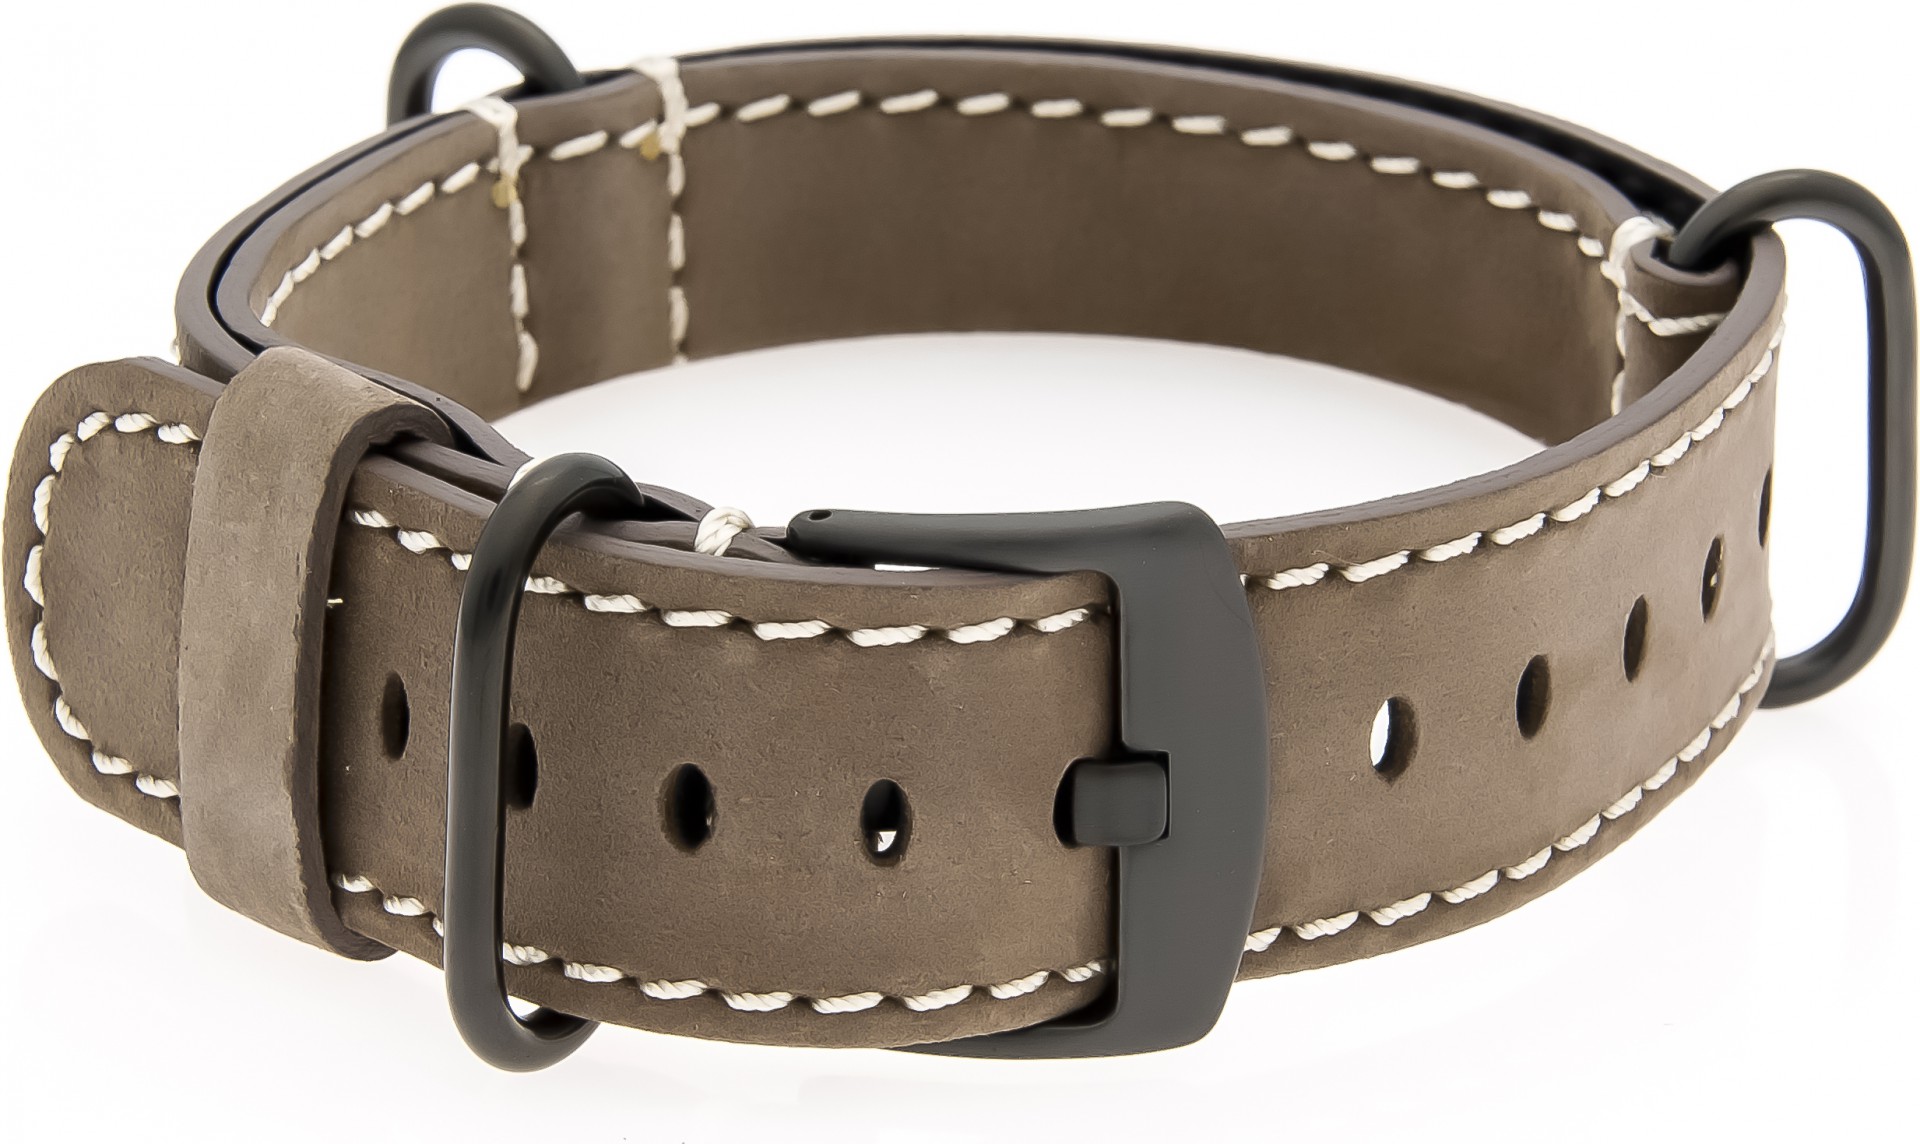  PVD-NATO Watch Strap - Strap - Military - Real Leather - PVD Brown/White 